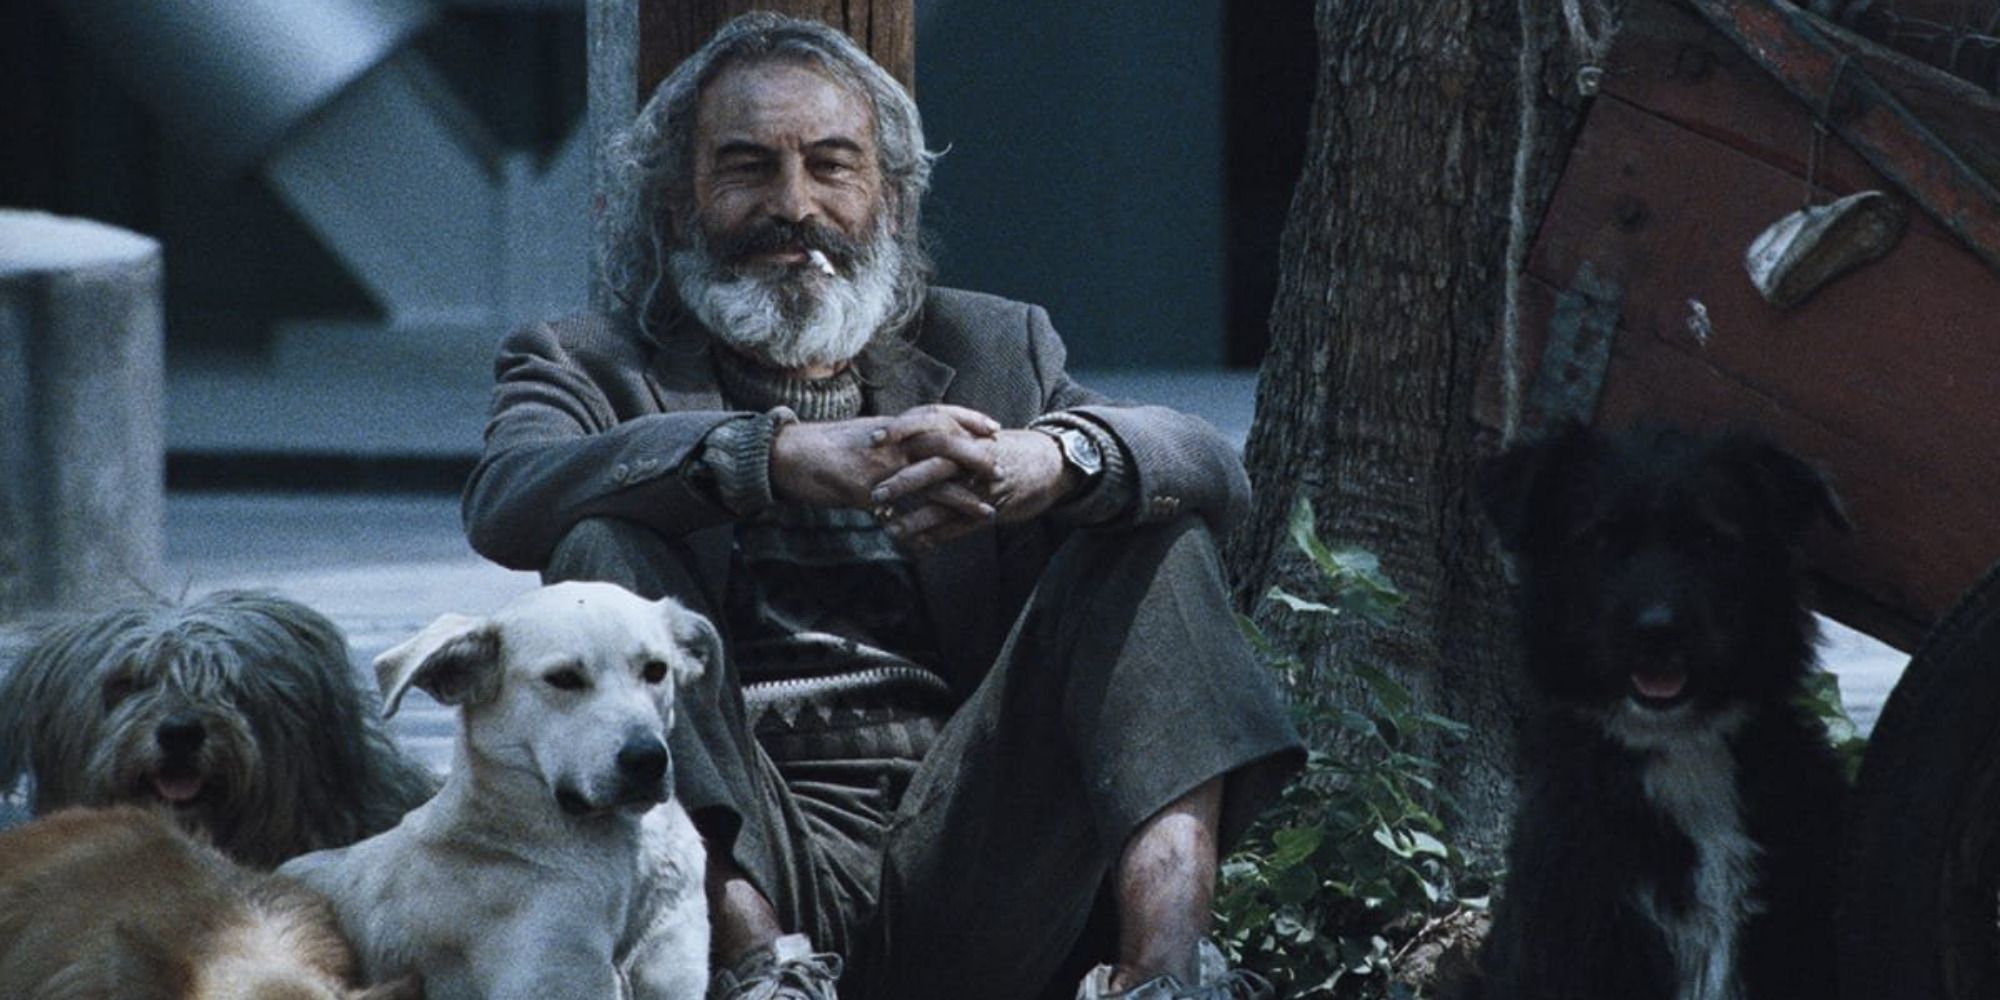 one of the main characters of "Amores Perros", sitting on the street with his dogs